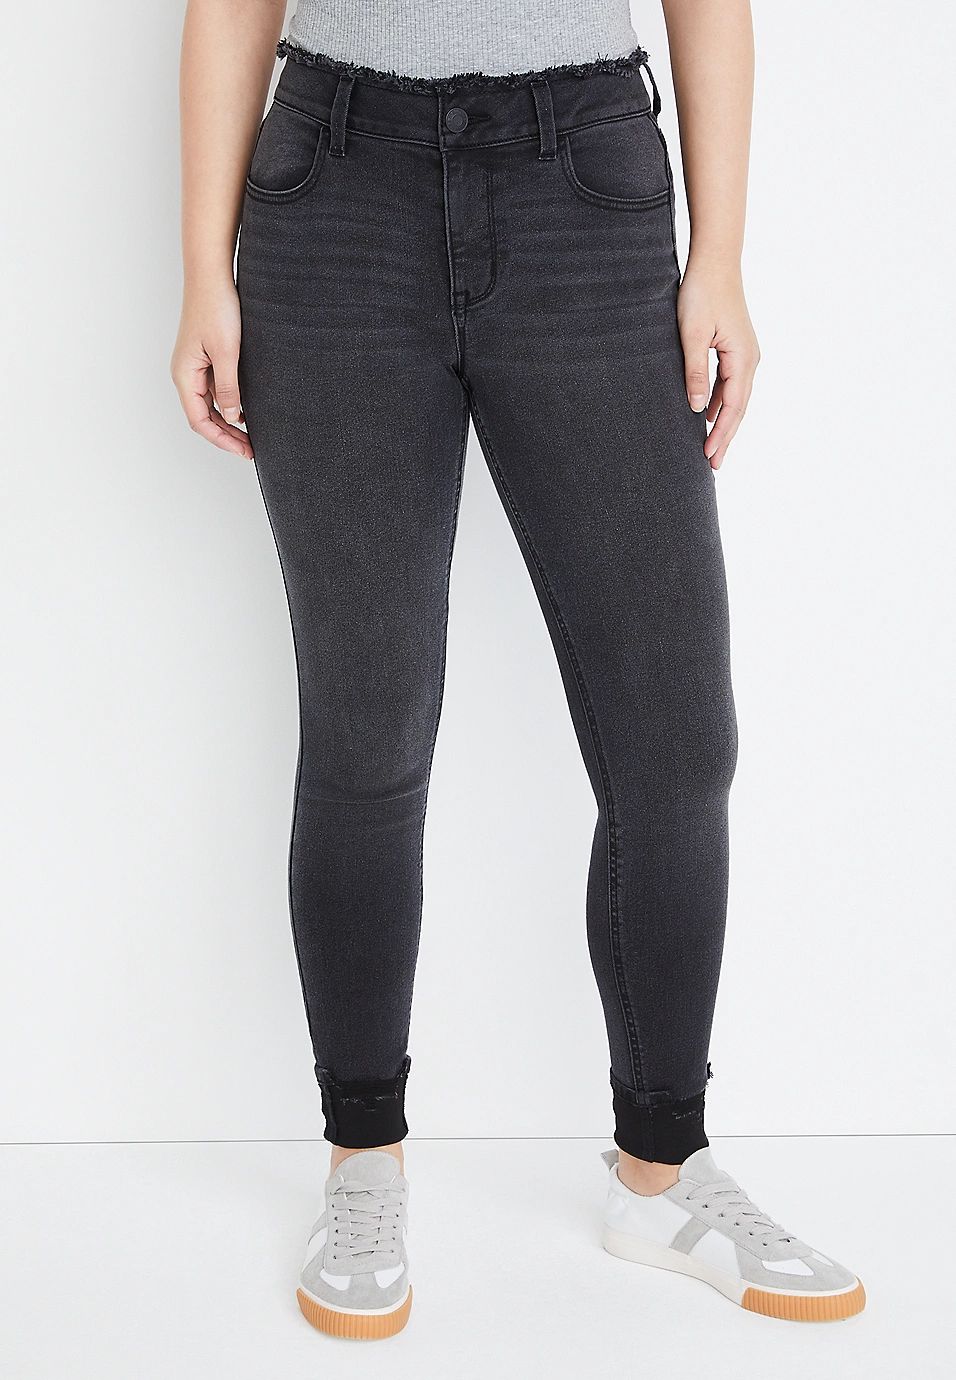 m jeans by maurices™ Cool Comfort Black High Rise Frayed Waist Jegging | Maurices